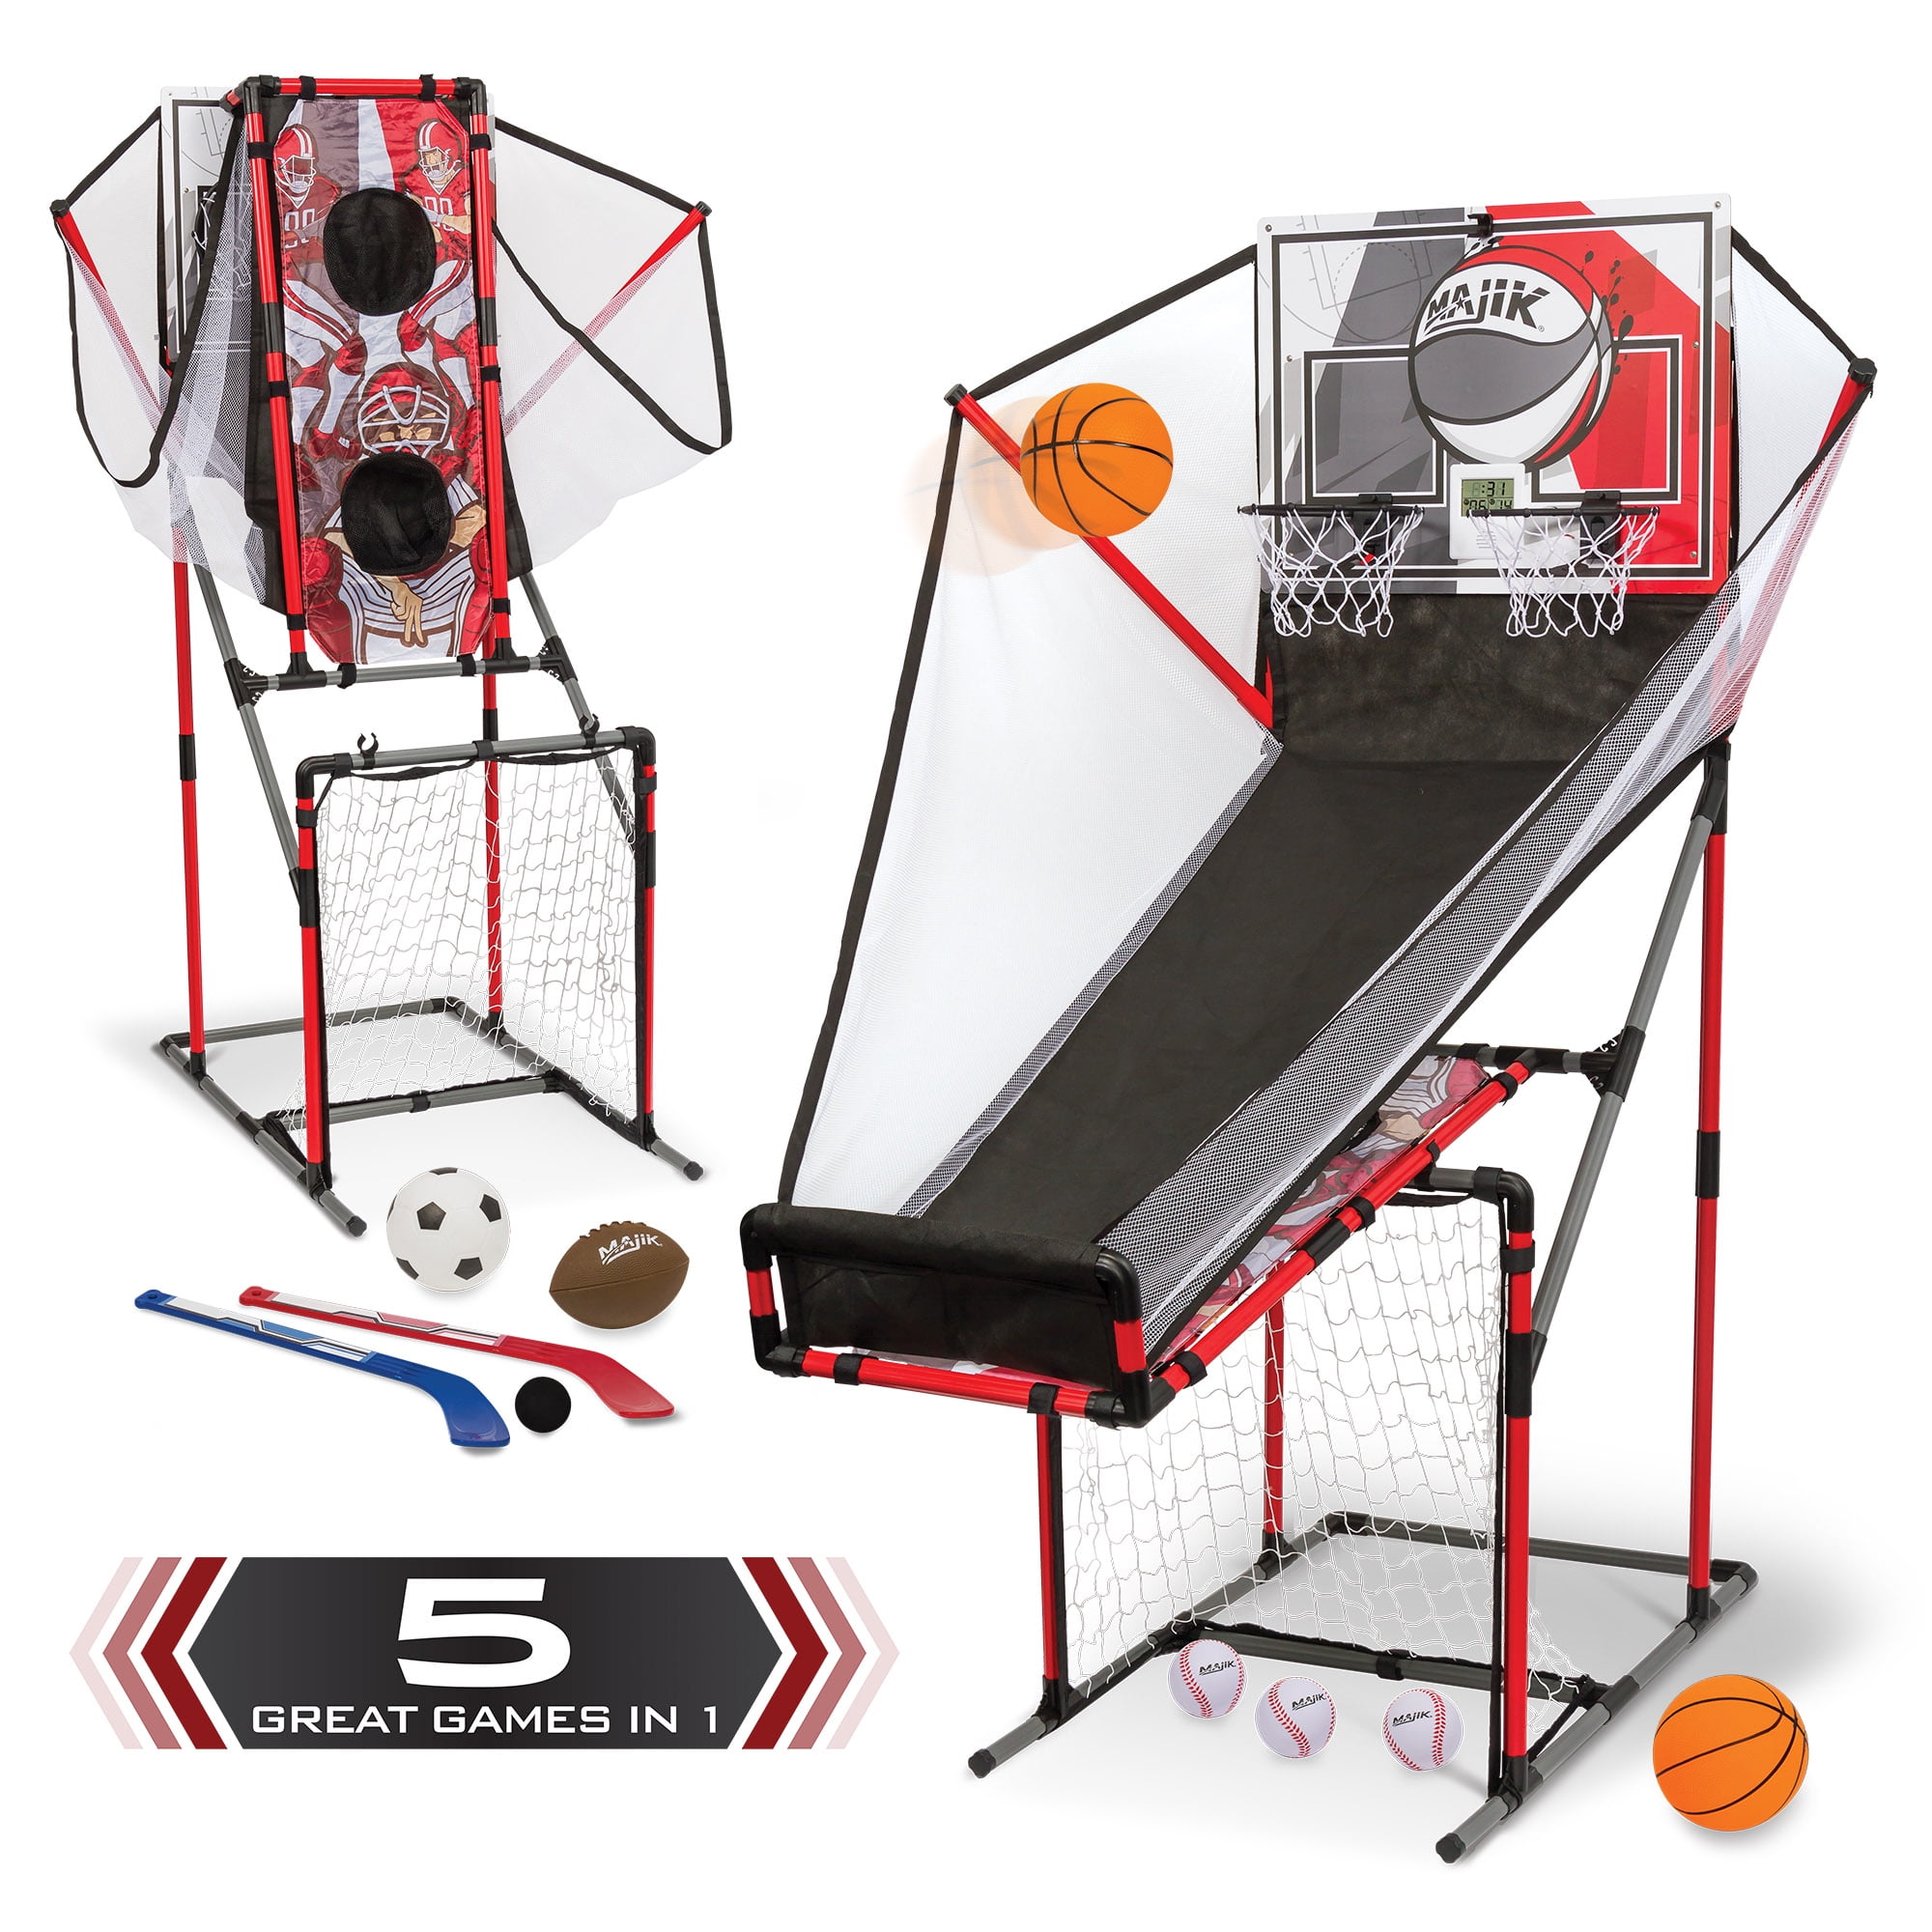 Majik 5-in-1 Sport Center Game System - Basketball, Football, Baseball, Soccer and Hockey- 45.39 in (W) x 65.98 in (H) x 56.42 in (D)